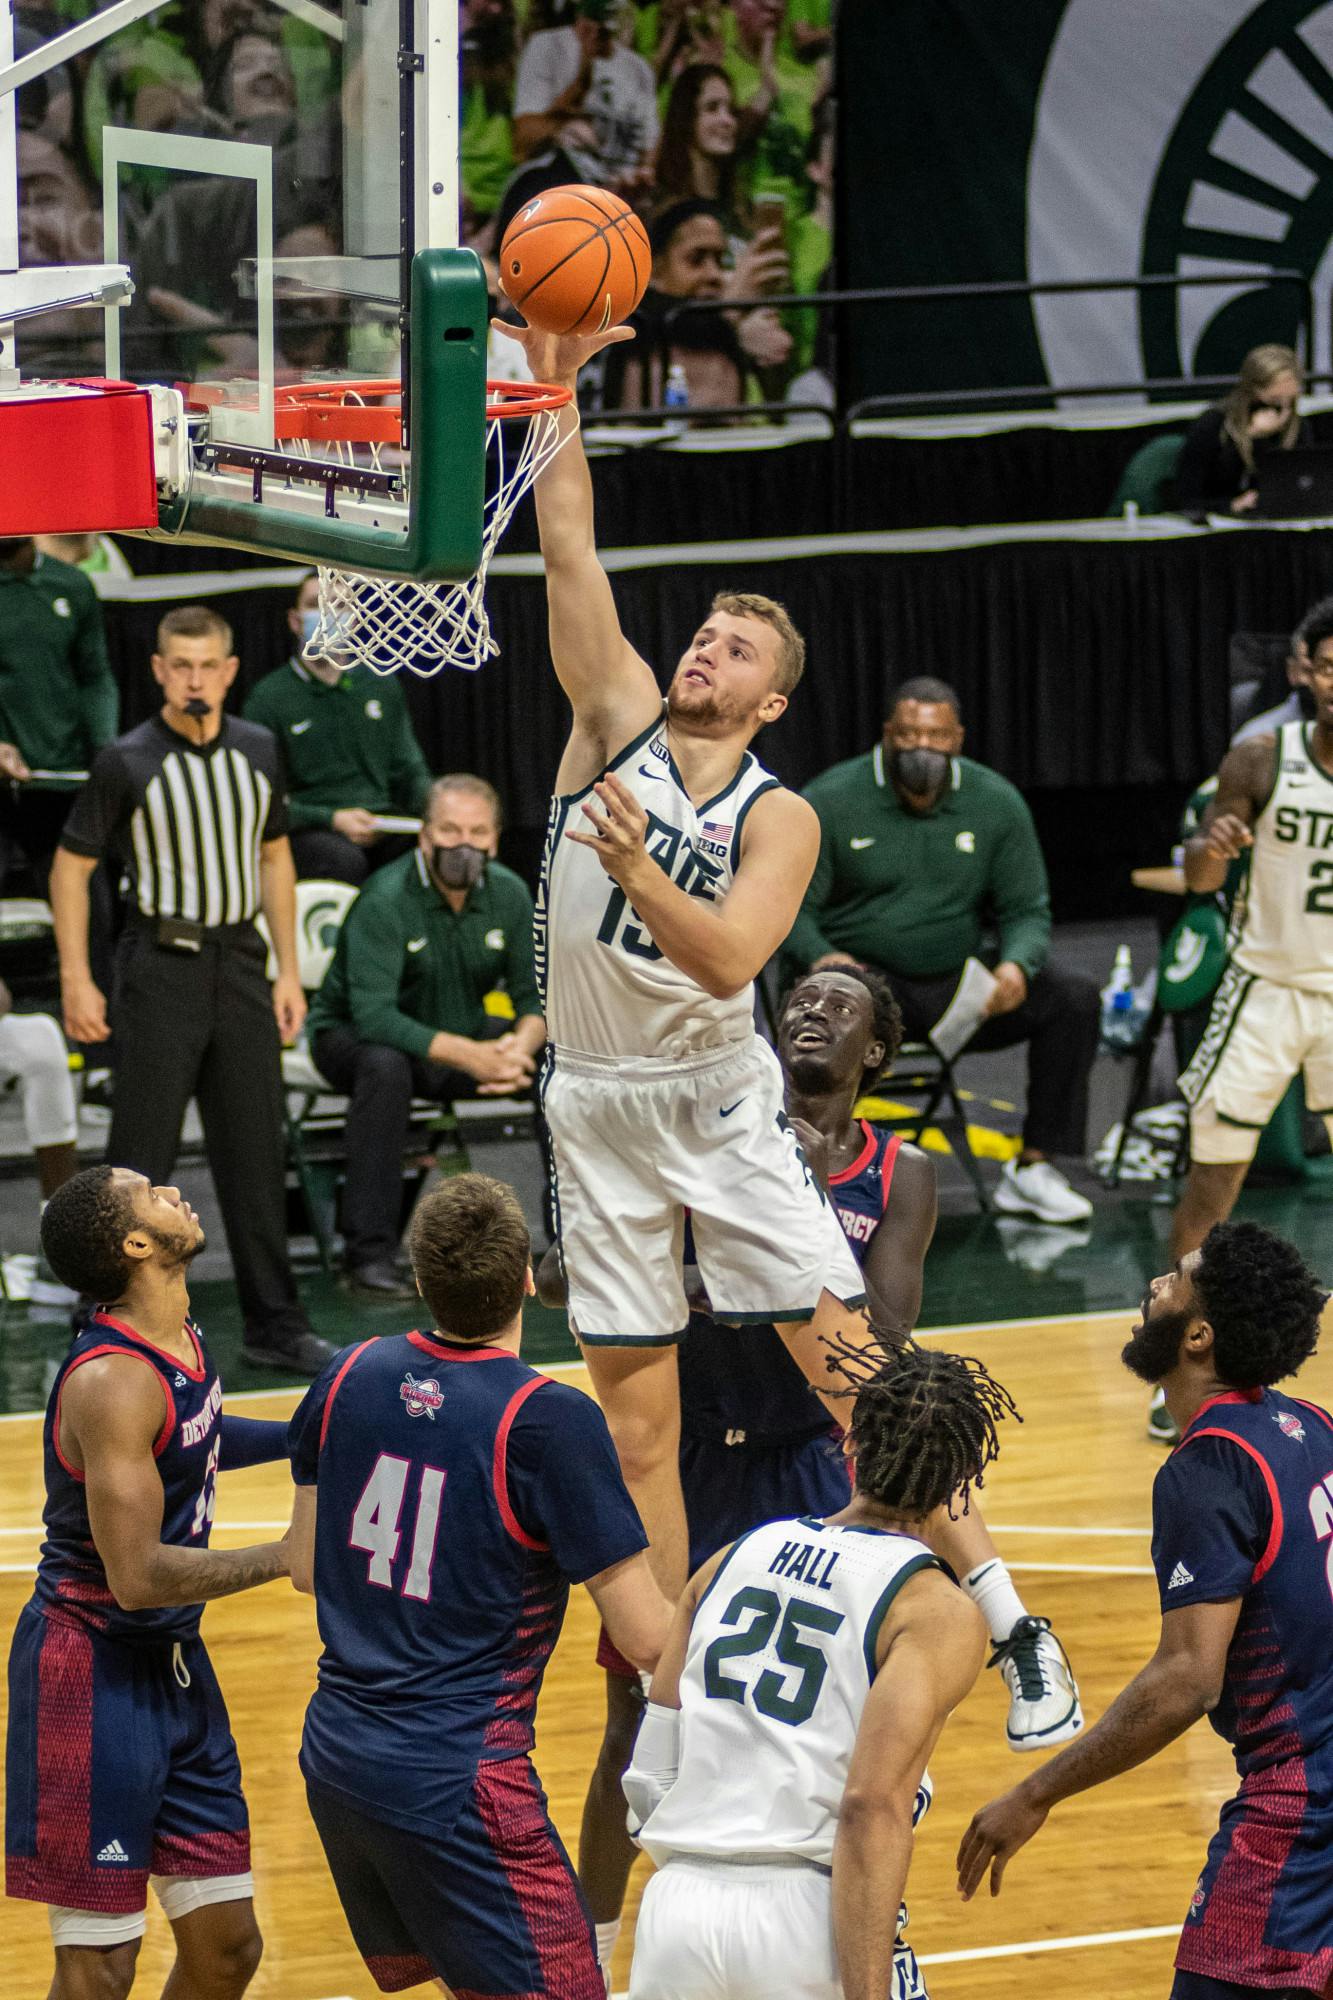 Junior forward Thomas Kithier (15) shoots the ball during the game against the Detroit Titans on Dec. 4, 2020 at the Breslin Center. The Spartans defeated the Titans, 83-76.